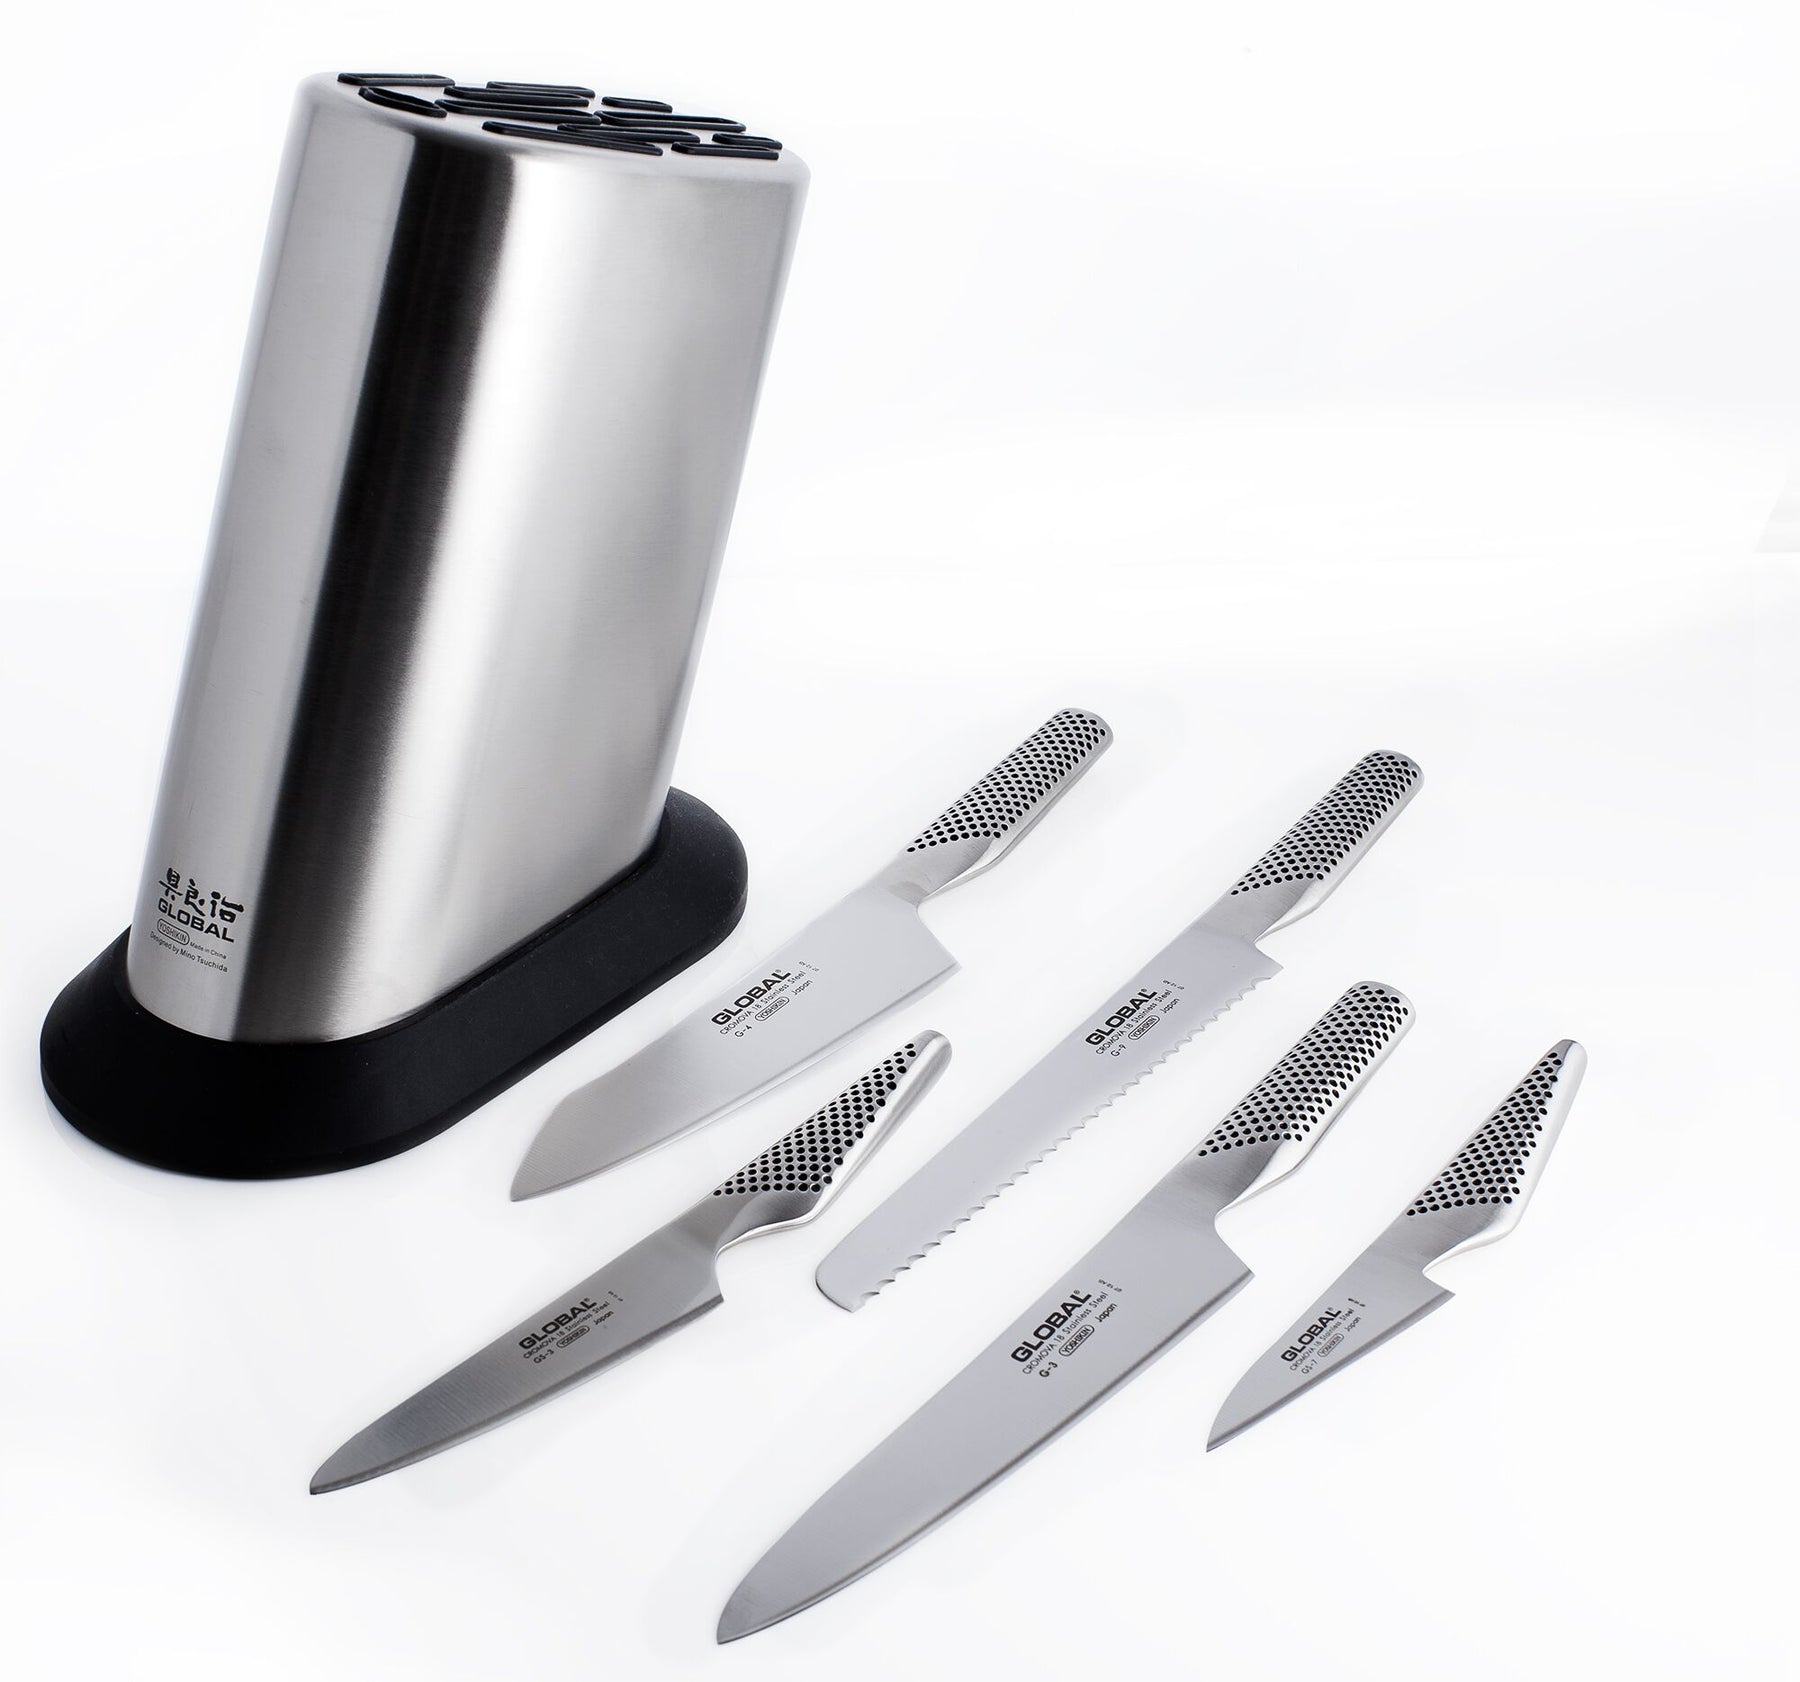 Global G-835/WS - 6 Piece Knife Set with Block